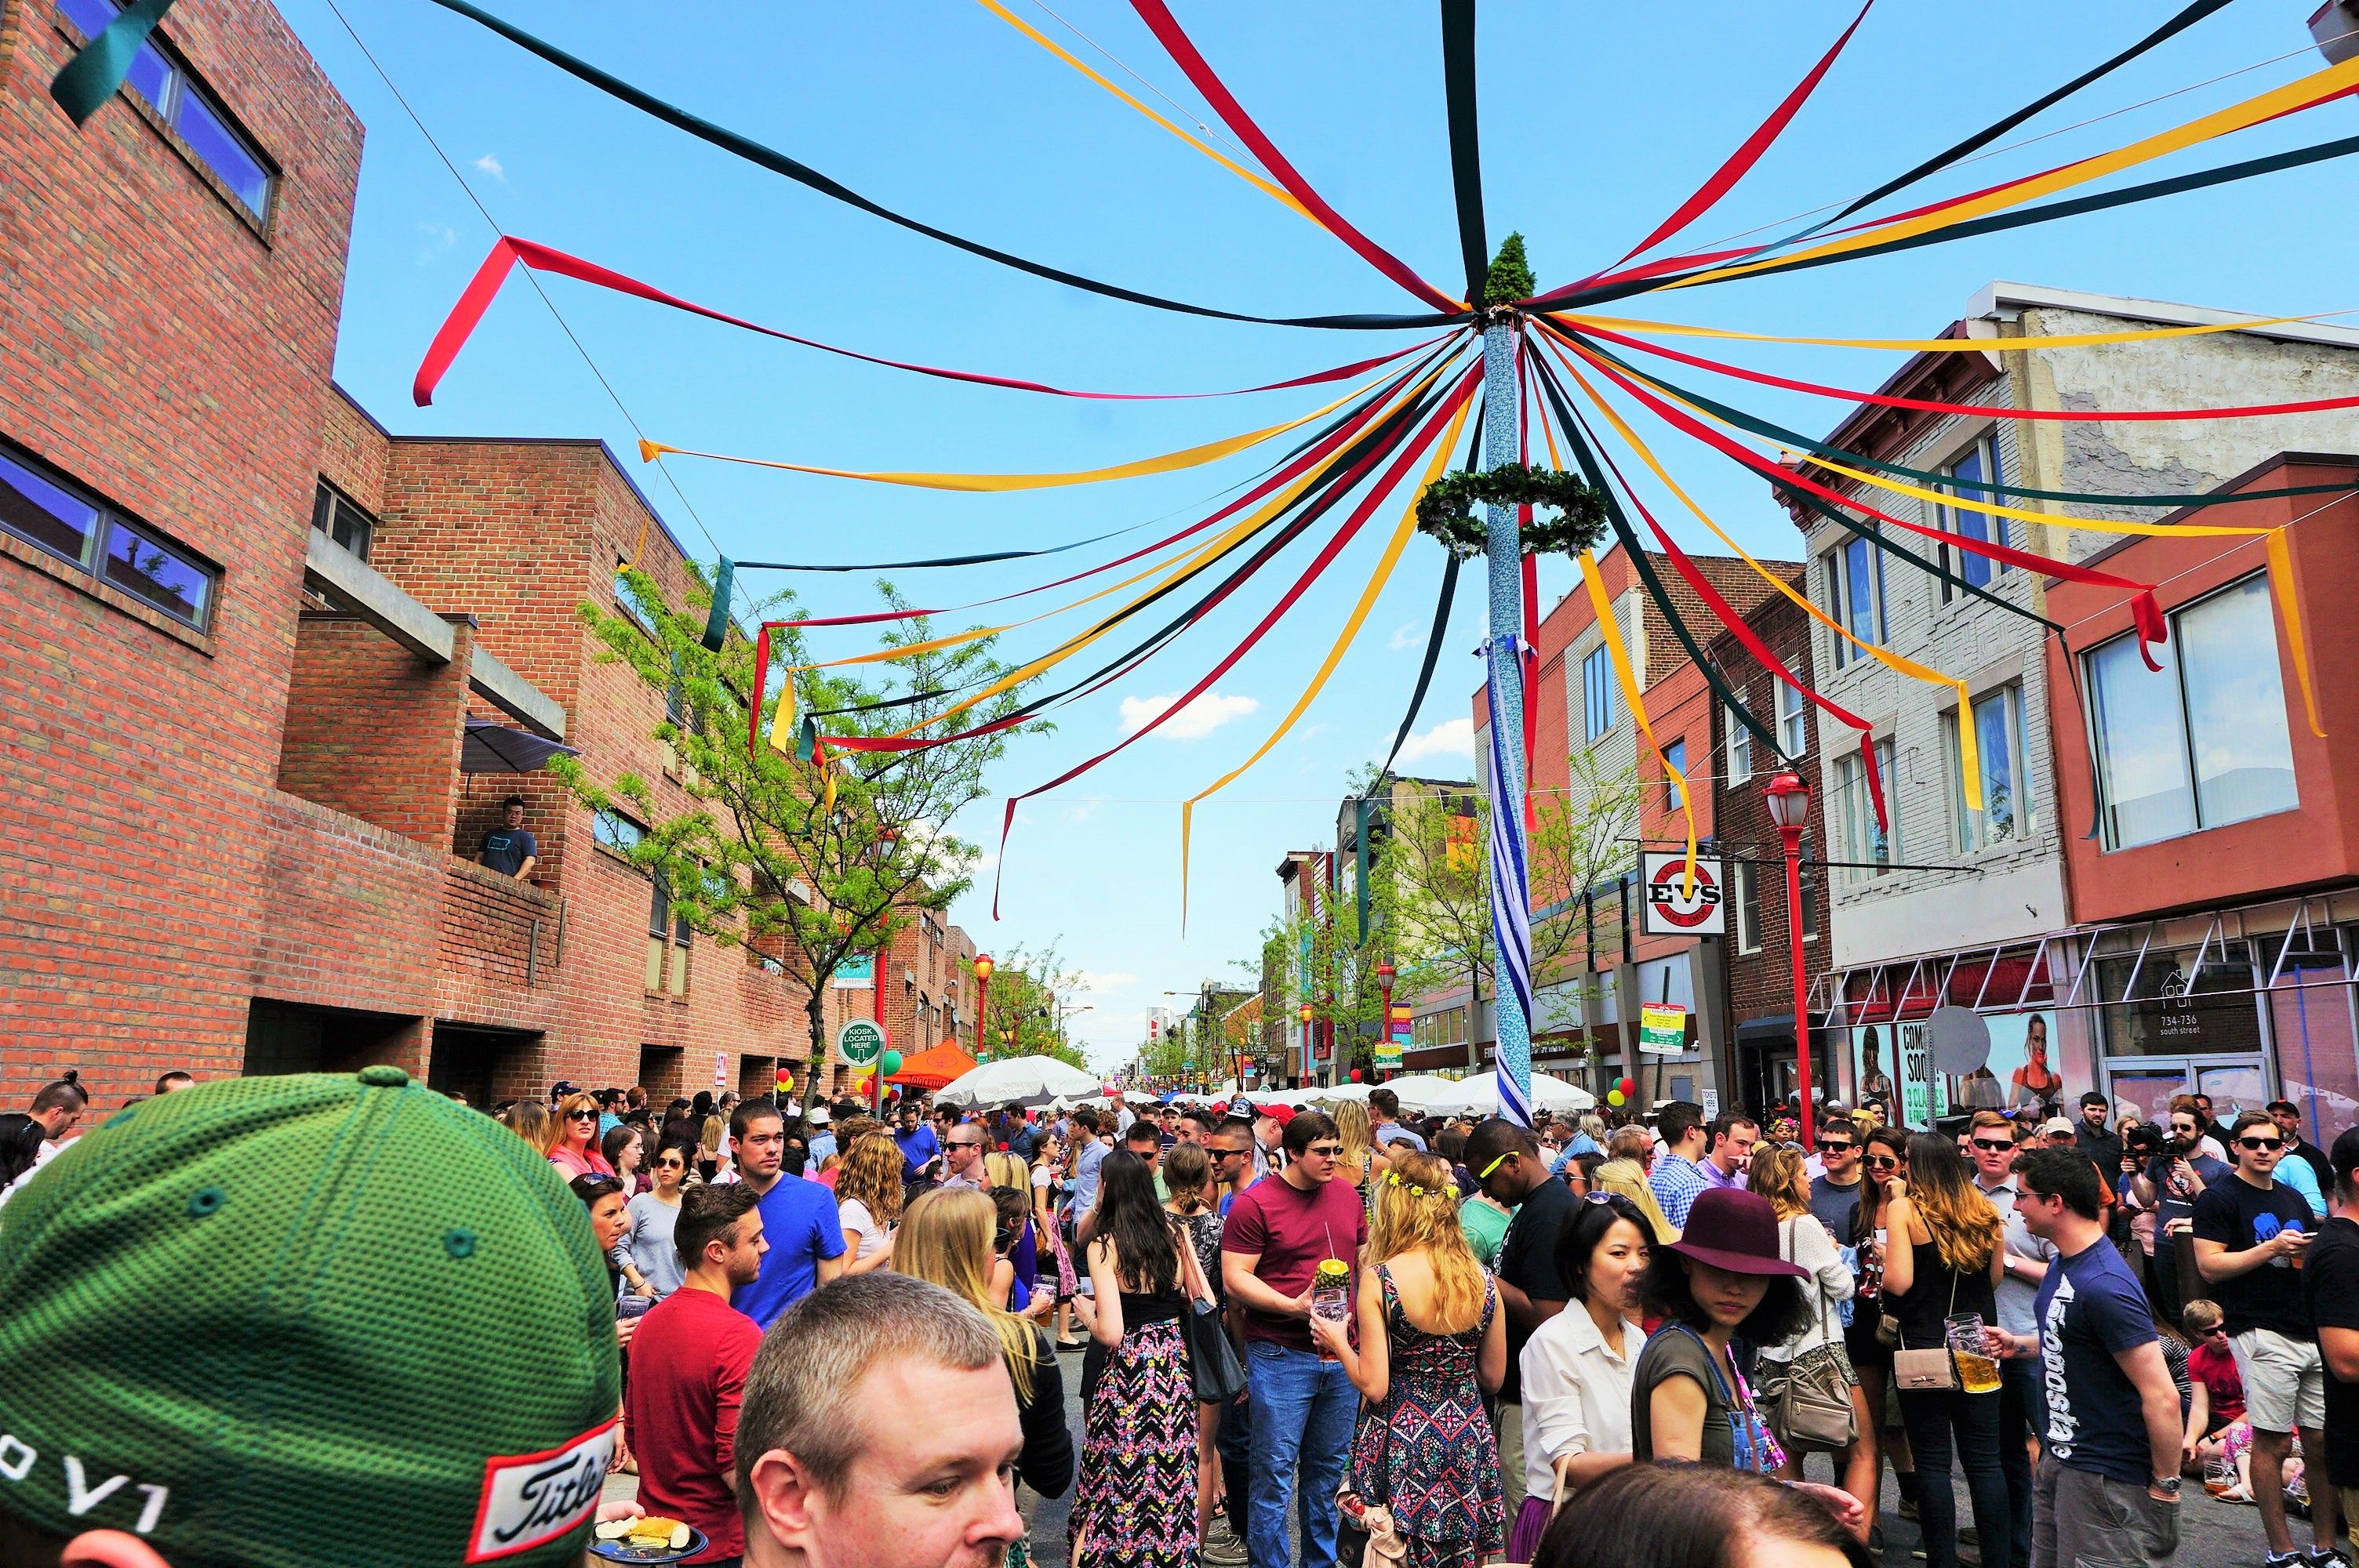 The Spring Festival on South Street in Philly returns on May 7th